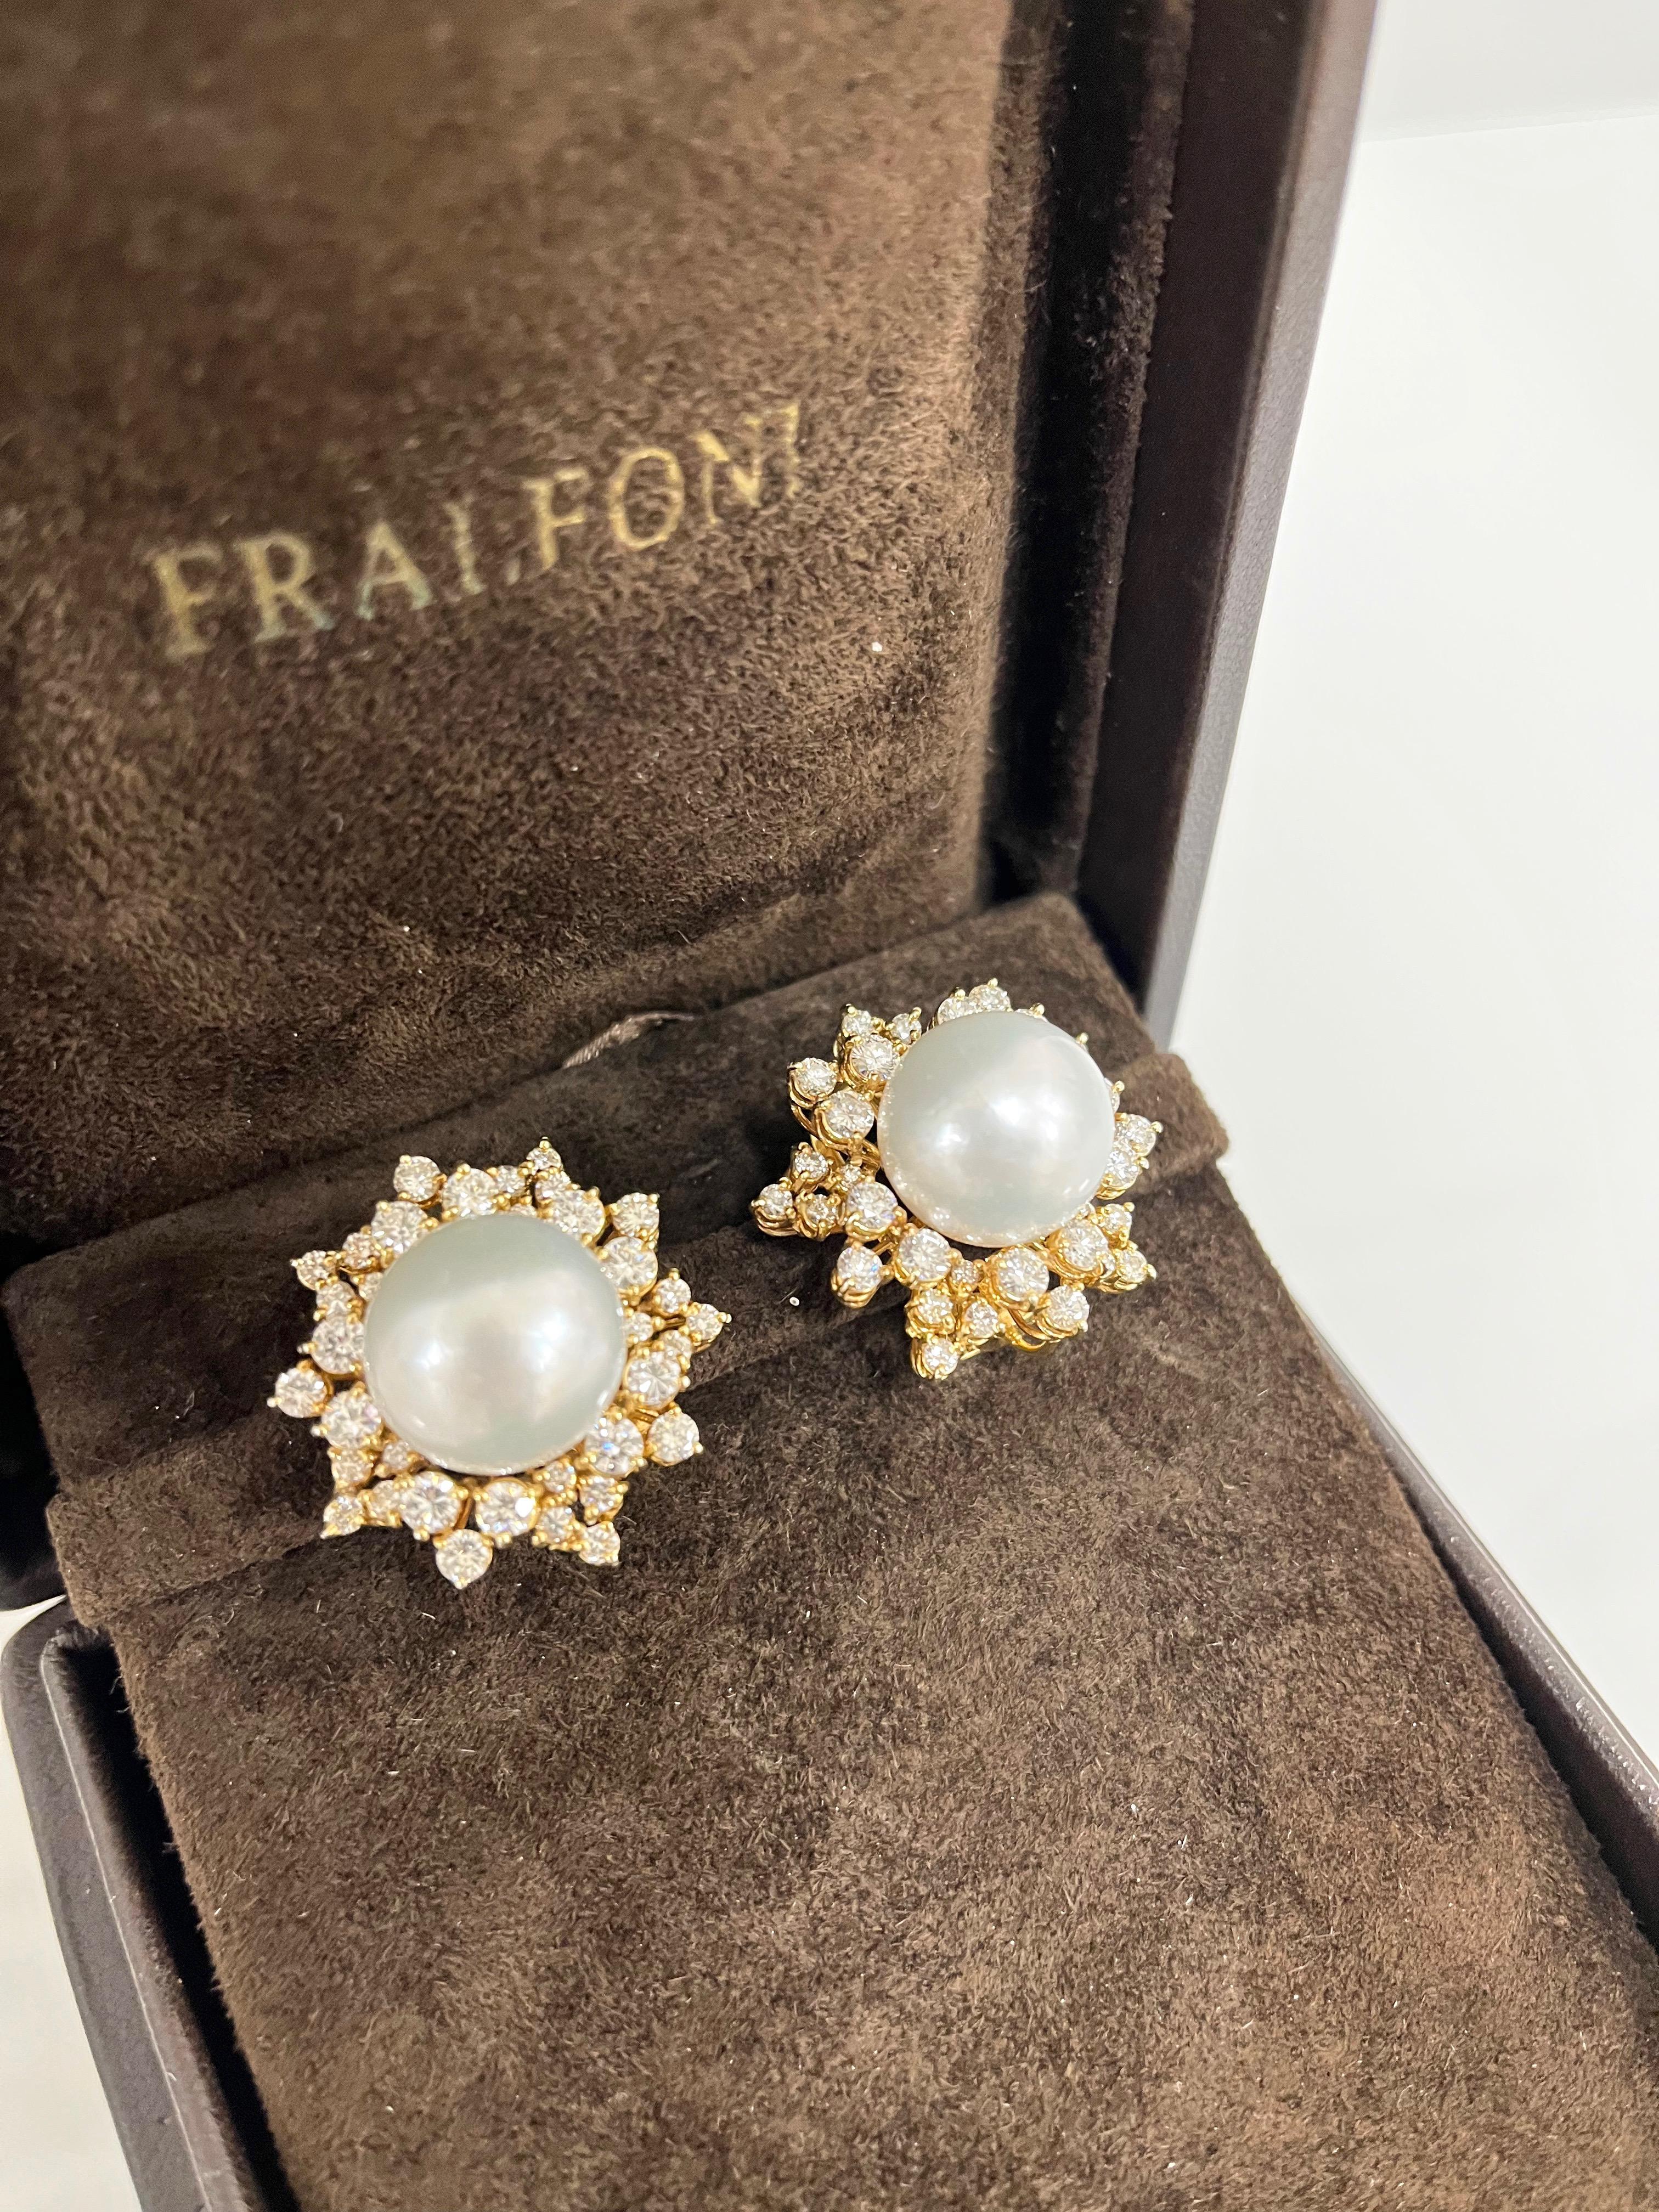 18 Karat yellow gold pair of clip-on earrings with 4.50 carat of round-cut diamonds ( H-I color / VVS1-VVS2 ) and South Sea pearls 14 mm. each.
These classic pair of earrings are hand-made in Italy.
Weight gr. 26.50
Diameter cm. 2.70
Pin and clip.